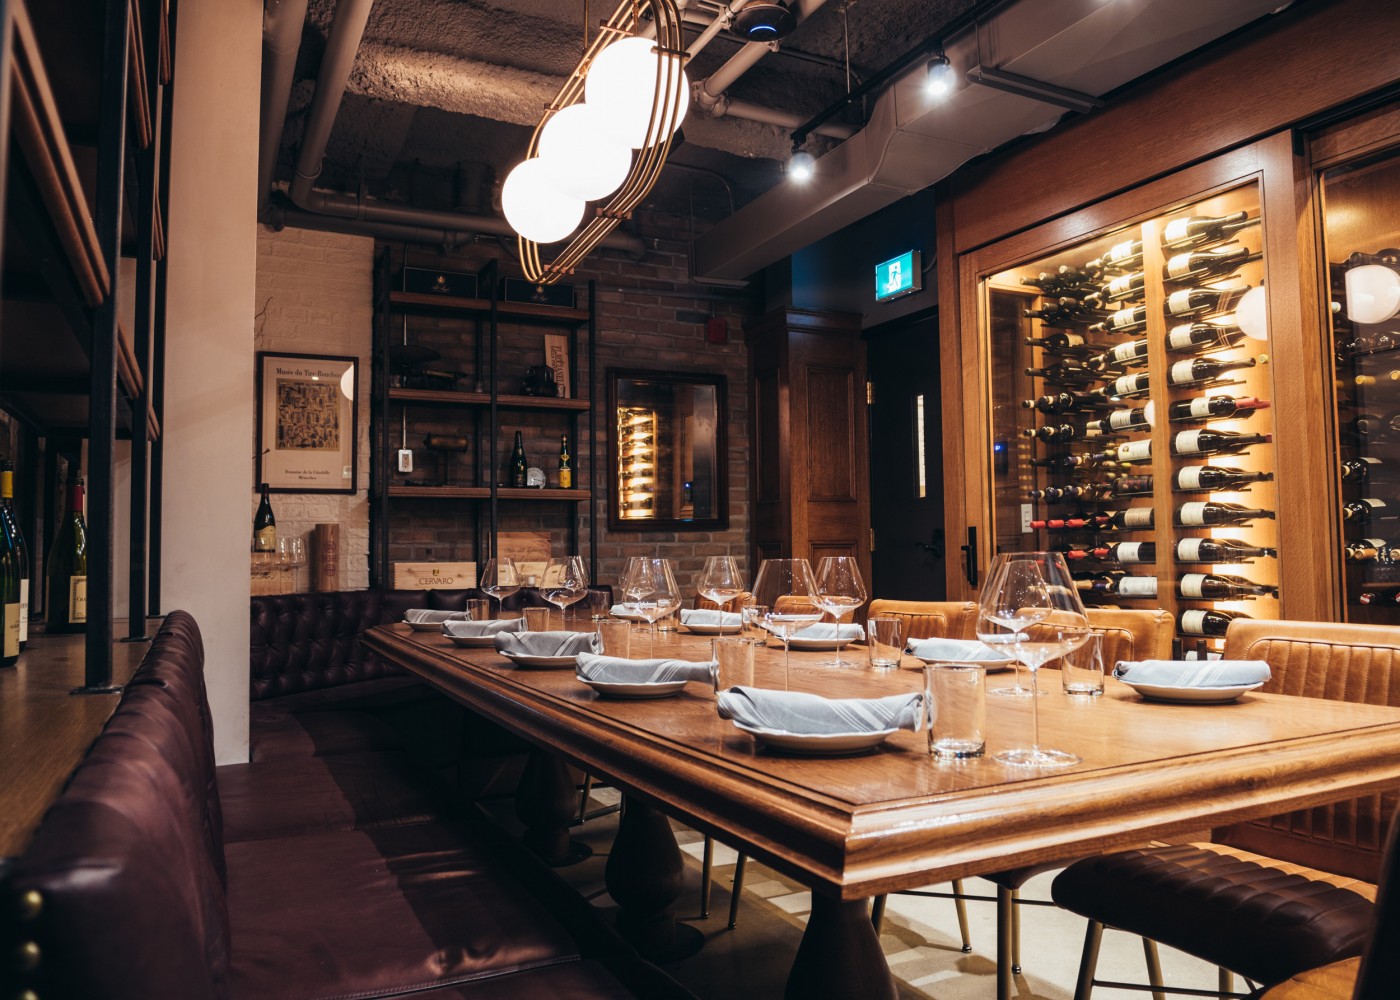 Private dining cellar table with tufted plush seating and shelving with wine bottles.